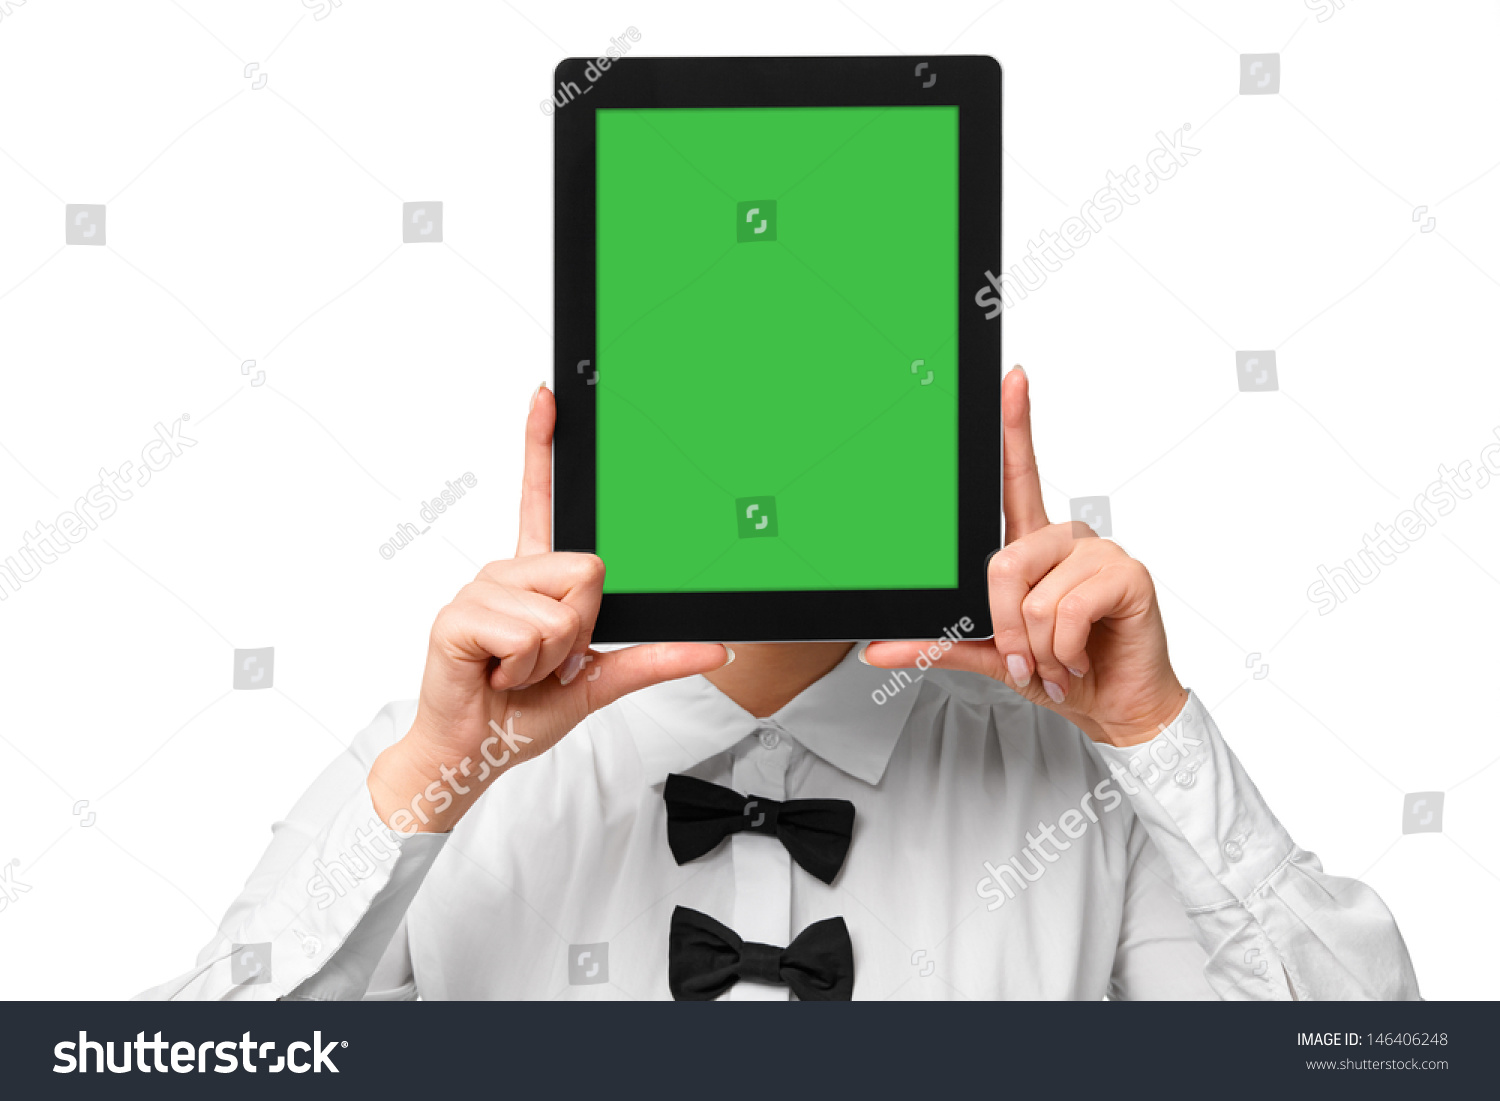 stock photo woman showing digital tablet covering her face isolated on white 146406248